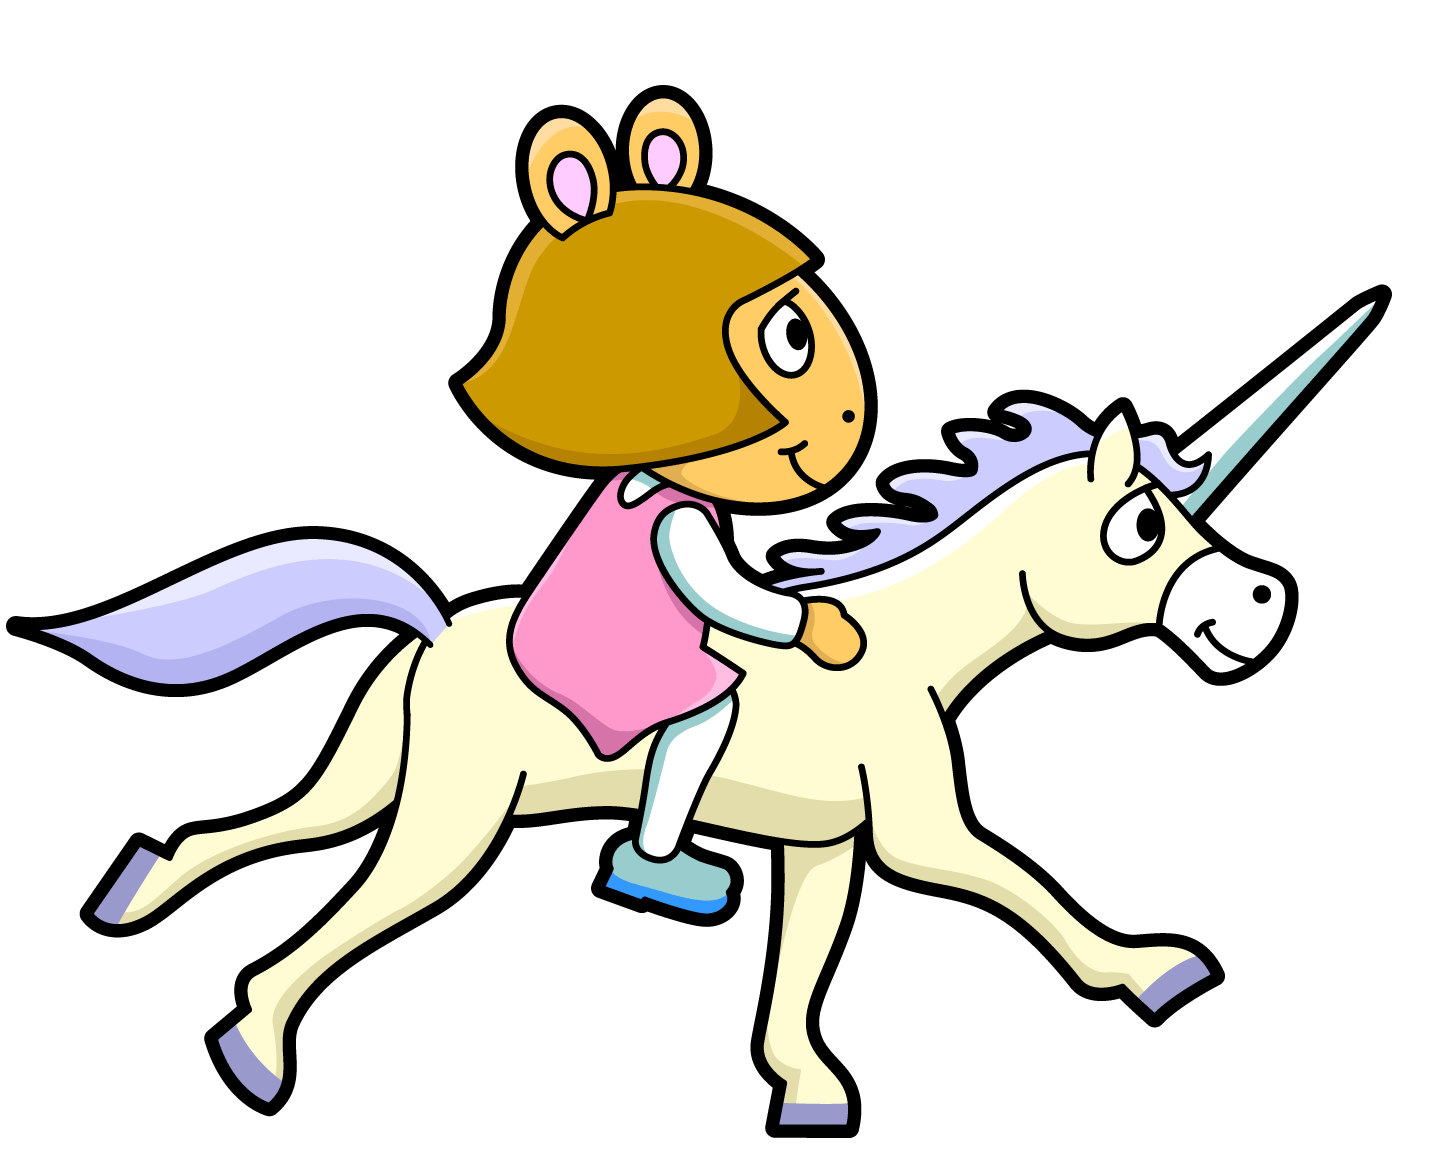 An animation of D.W. riding a unicorn.